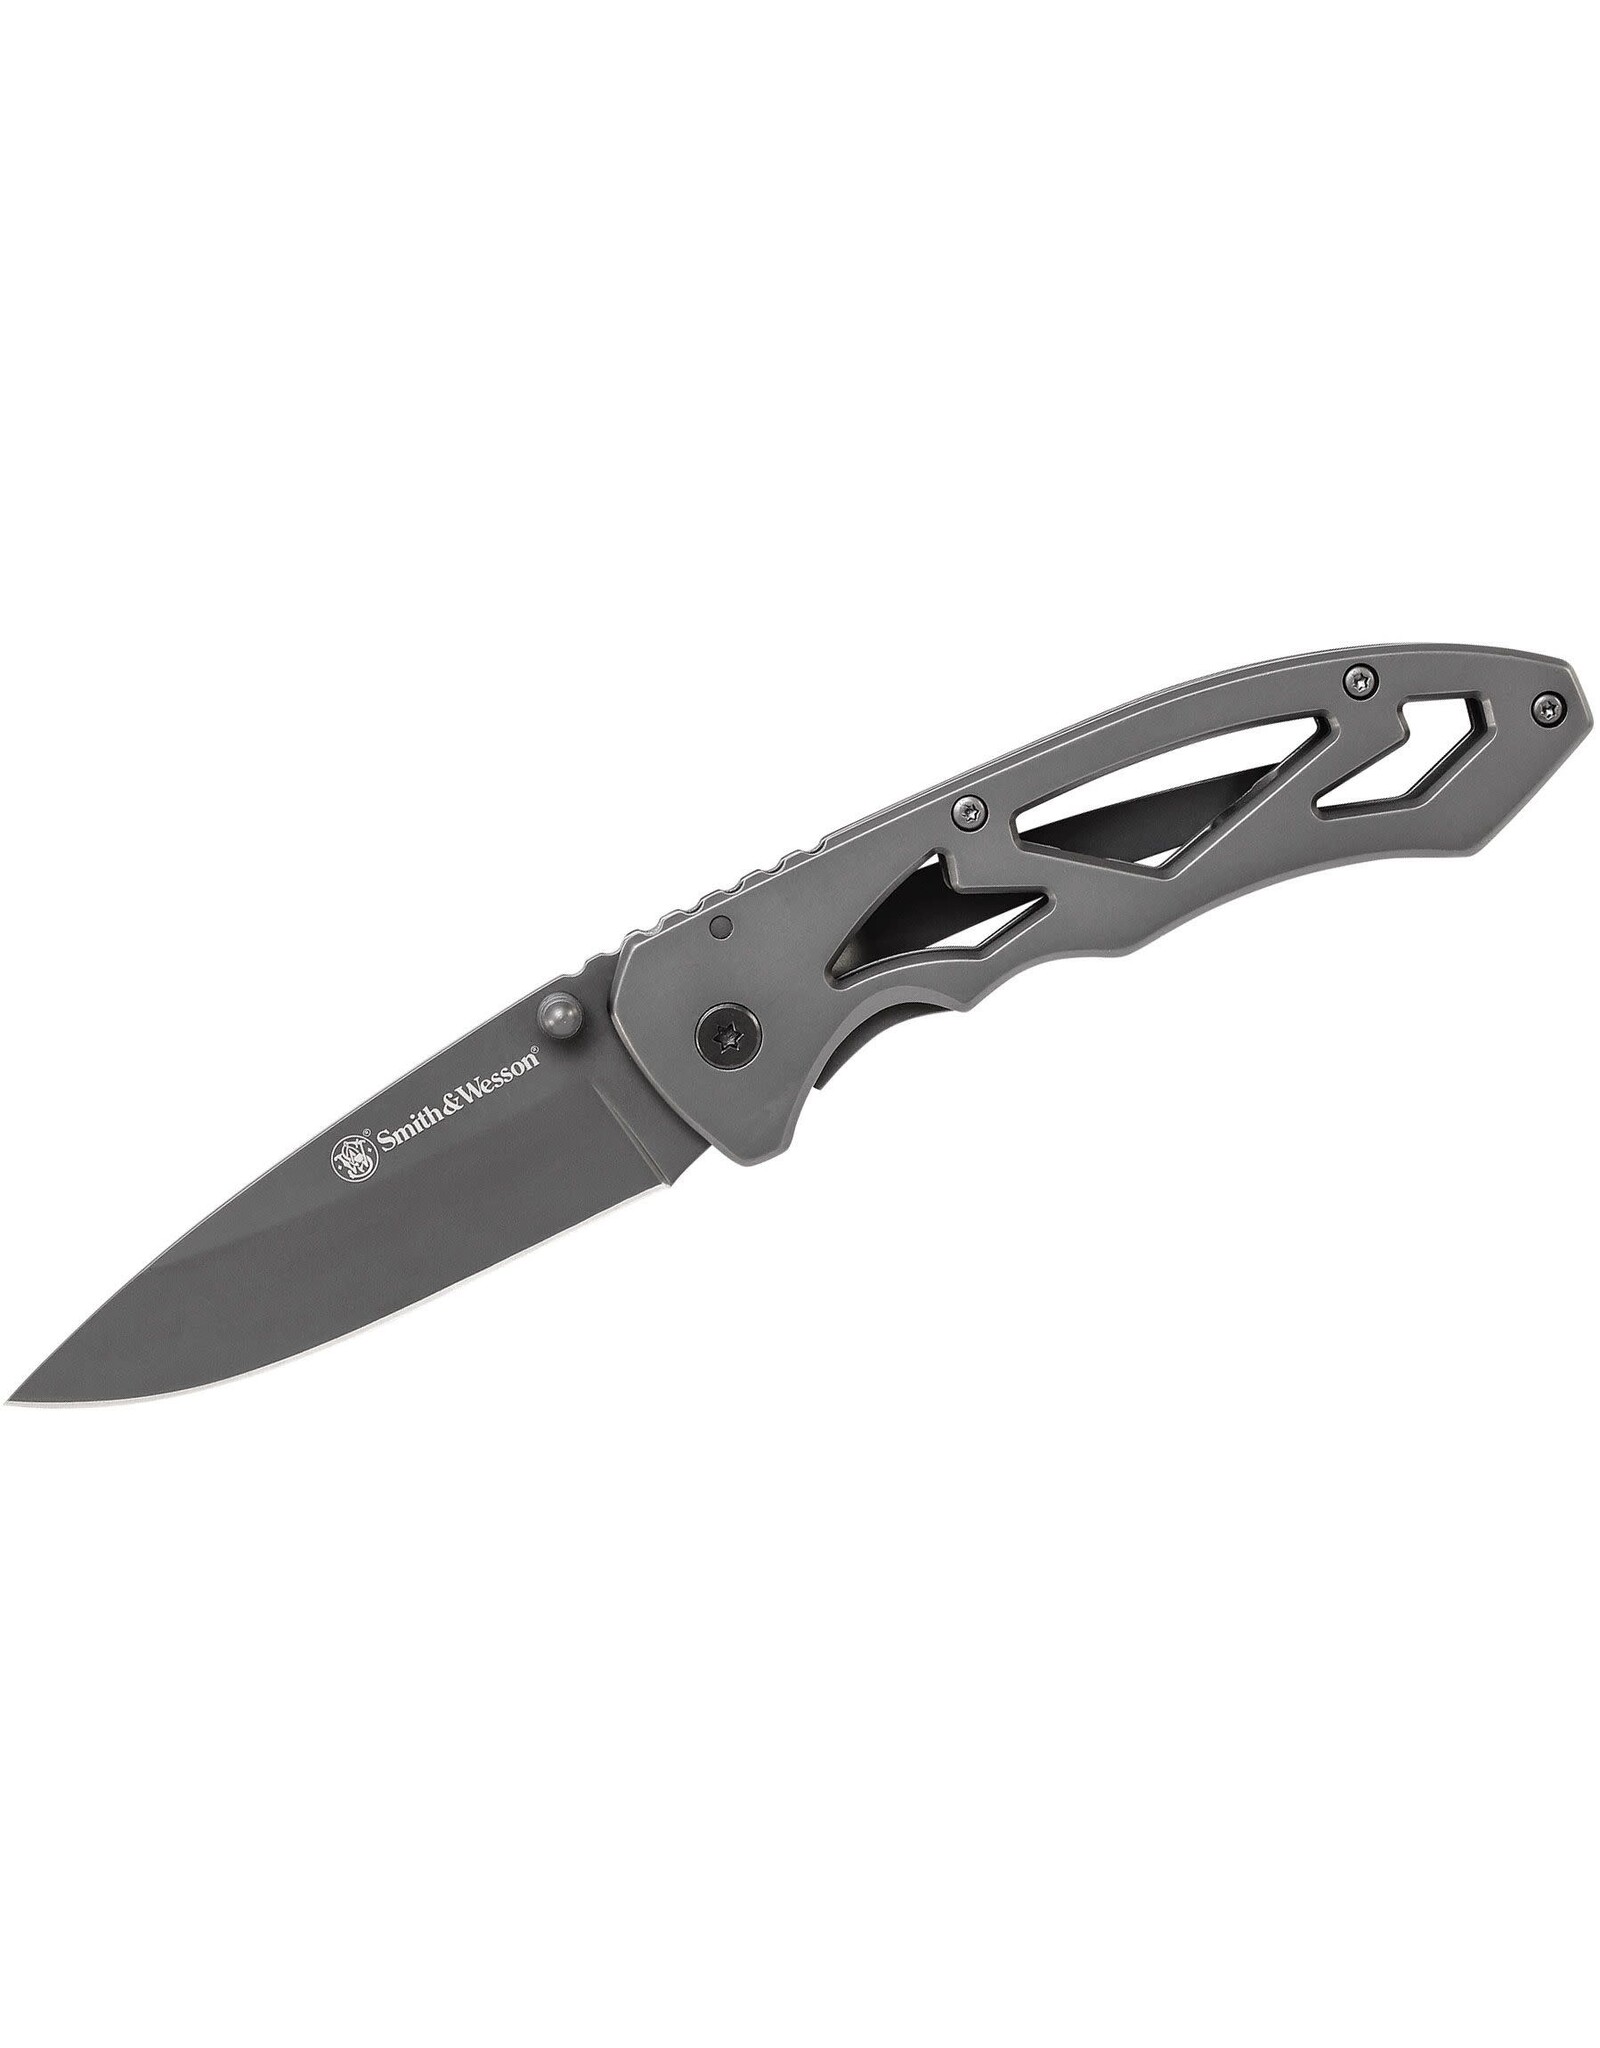 Smith & Wesson Smith & Wesson CK400L Large Frame Lock Folder 3" Drop Point Plain Blade, Stainless Steel Handles - CK400LCP